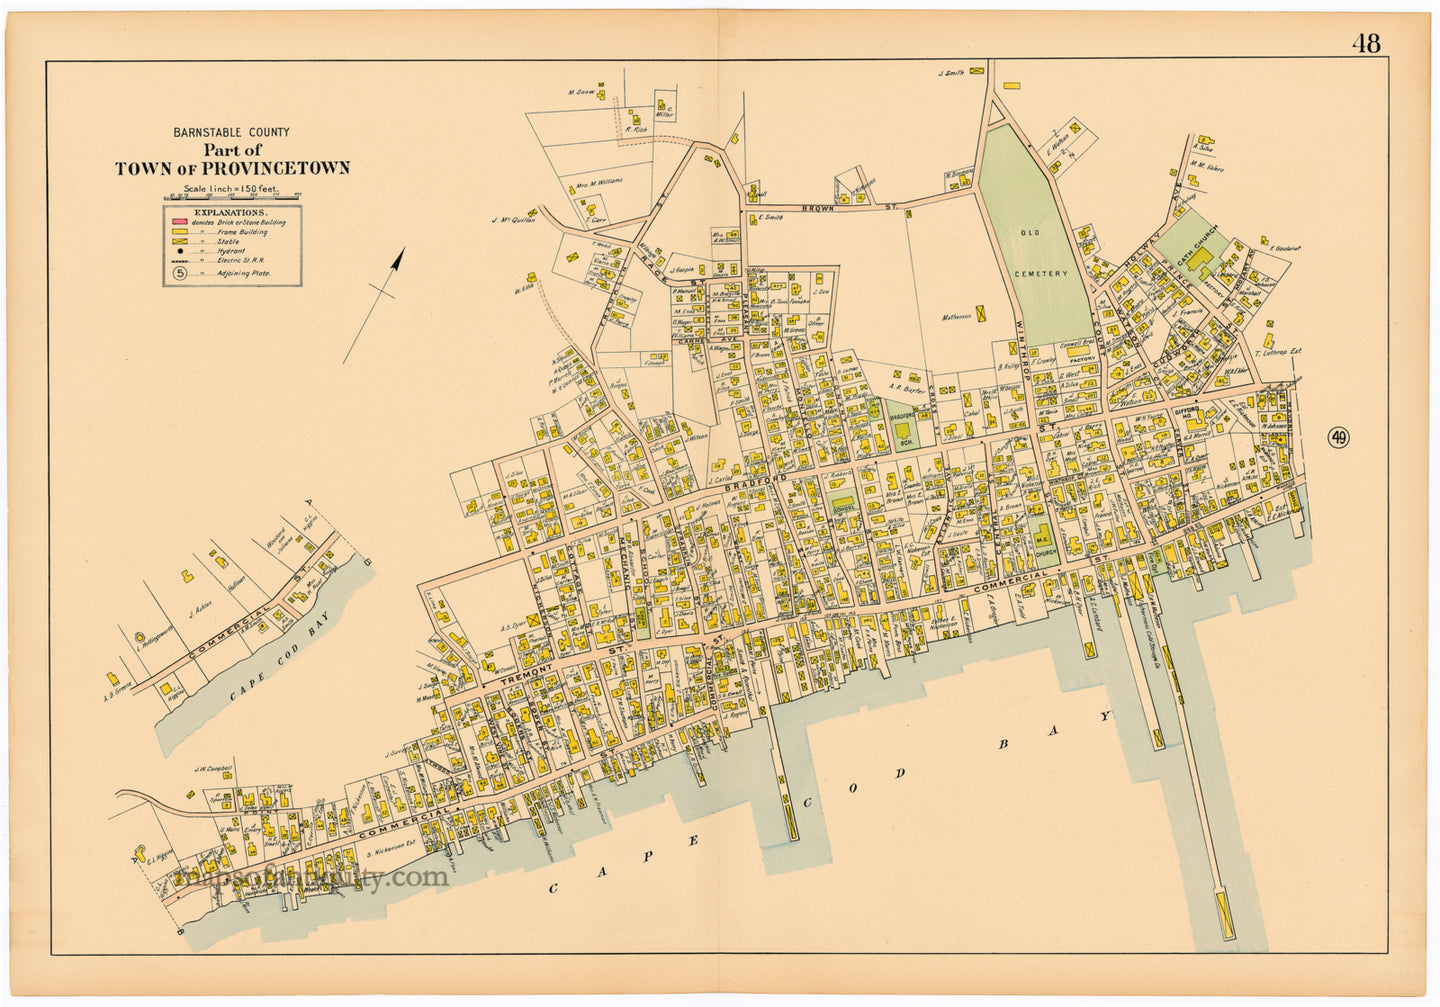 Reproduction-Part-of-the-Town-of-Provincetown-p.-48---Town-and-Village-Maps-Atlas-of-Barnstable-County-Walker-1906.----Reproduction---Reproductions-Cape-Cod-and-Islands-Reproduction--Maps-Of-Antiquity